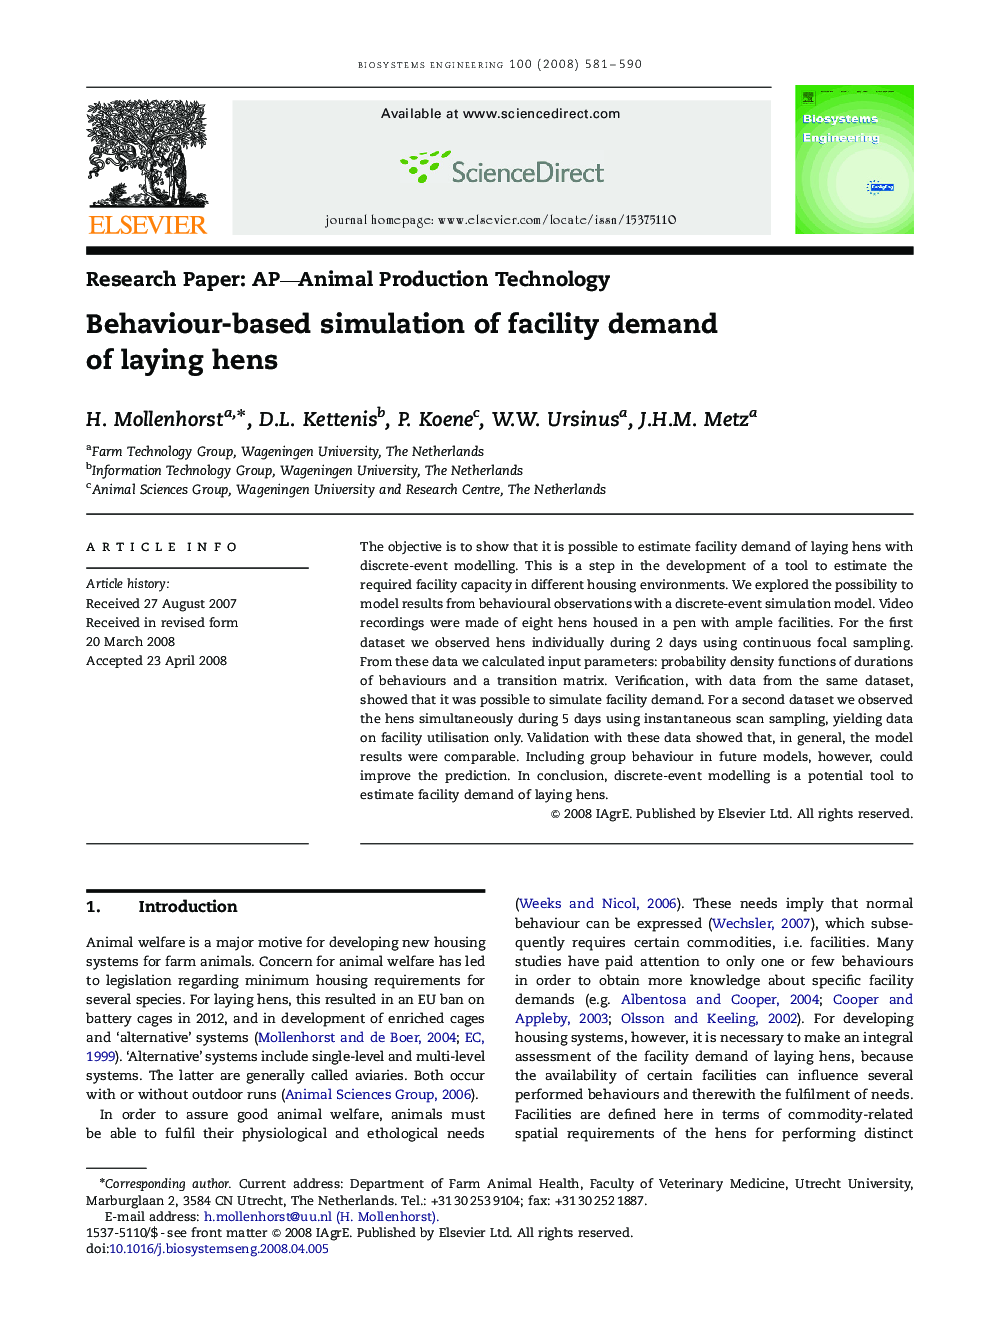 Behaviour-based simulation of facility demand of laying hens